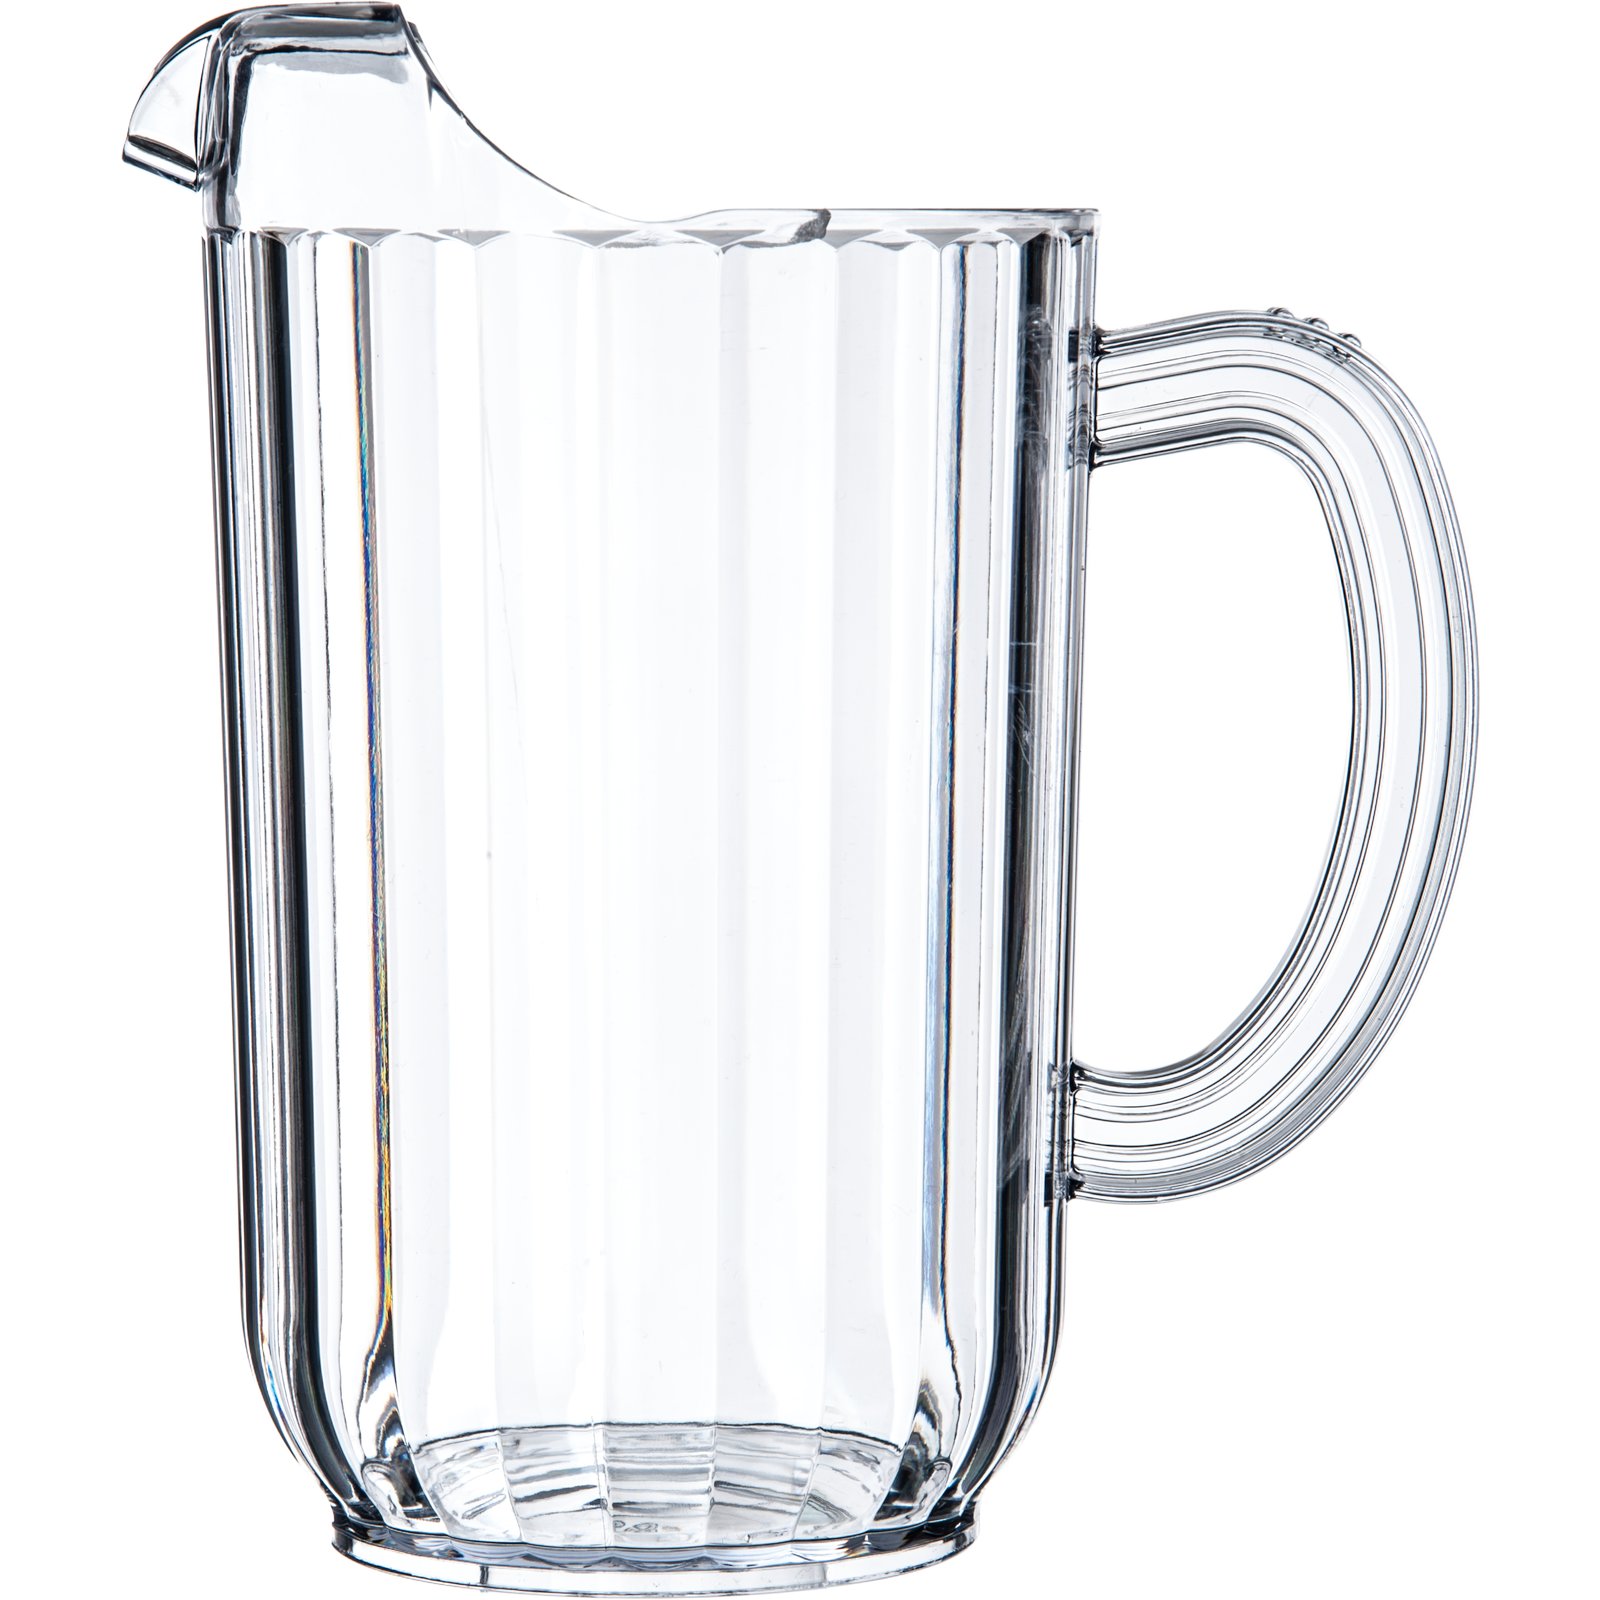 CARL-553807 48 oz. Fluted Pitcher with Ice Trap (Clear)